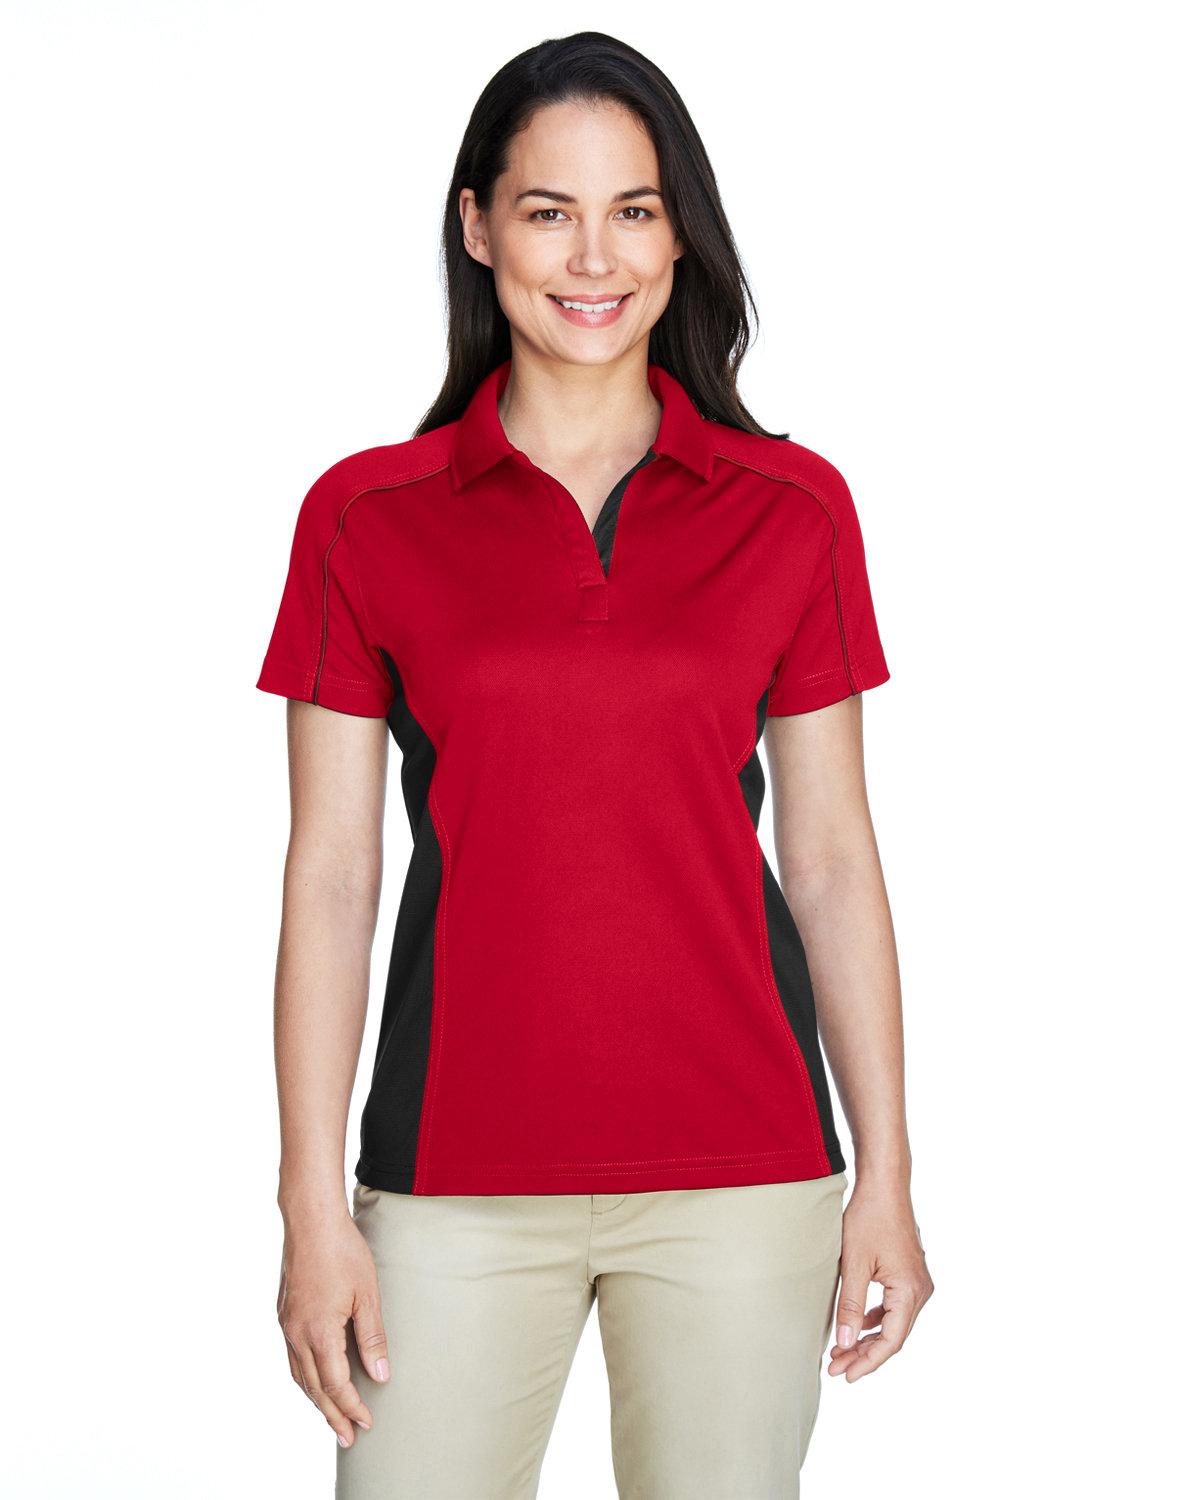 Extreme Ladies' Eperformance™ Fuse Snag Protection Plus Colorblock Polo CLASSIC RED/ BLK 